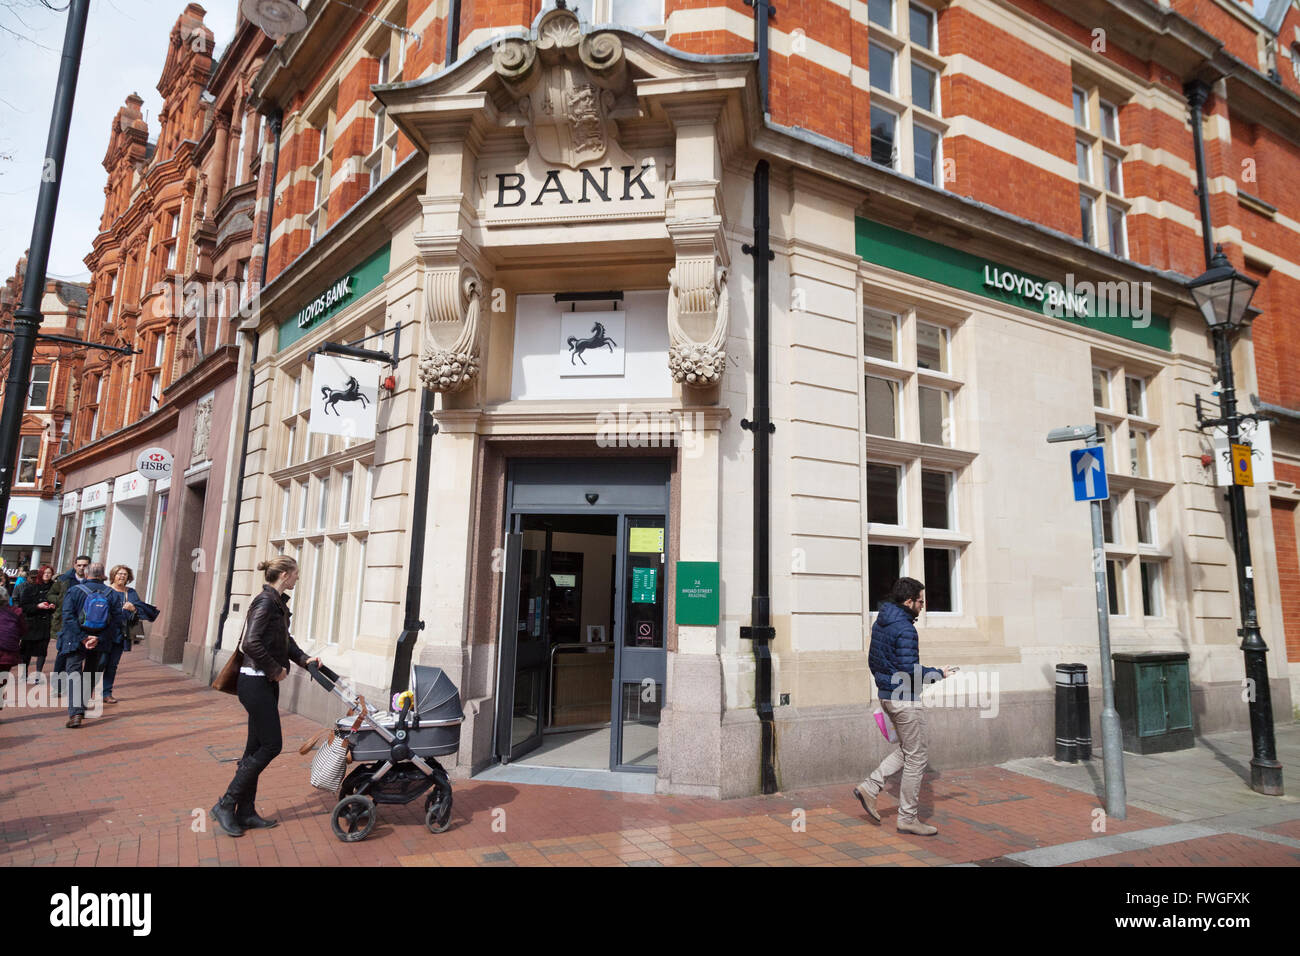 The exterior of the Lloyds Bank branch, Broad Street, Reading Berkshire UK Stock Photo